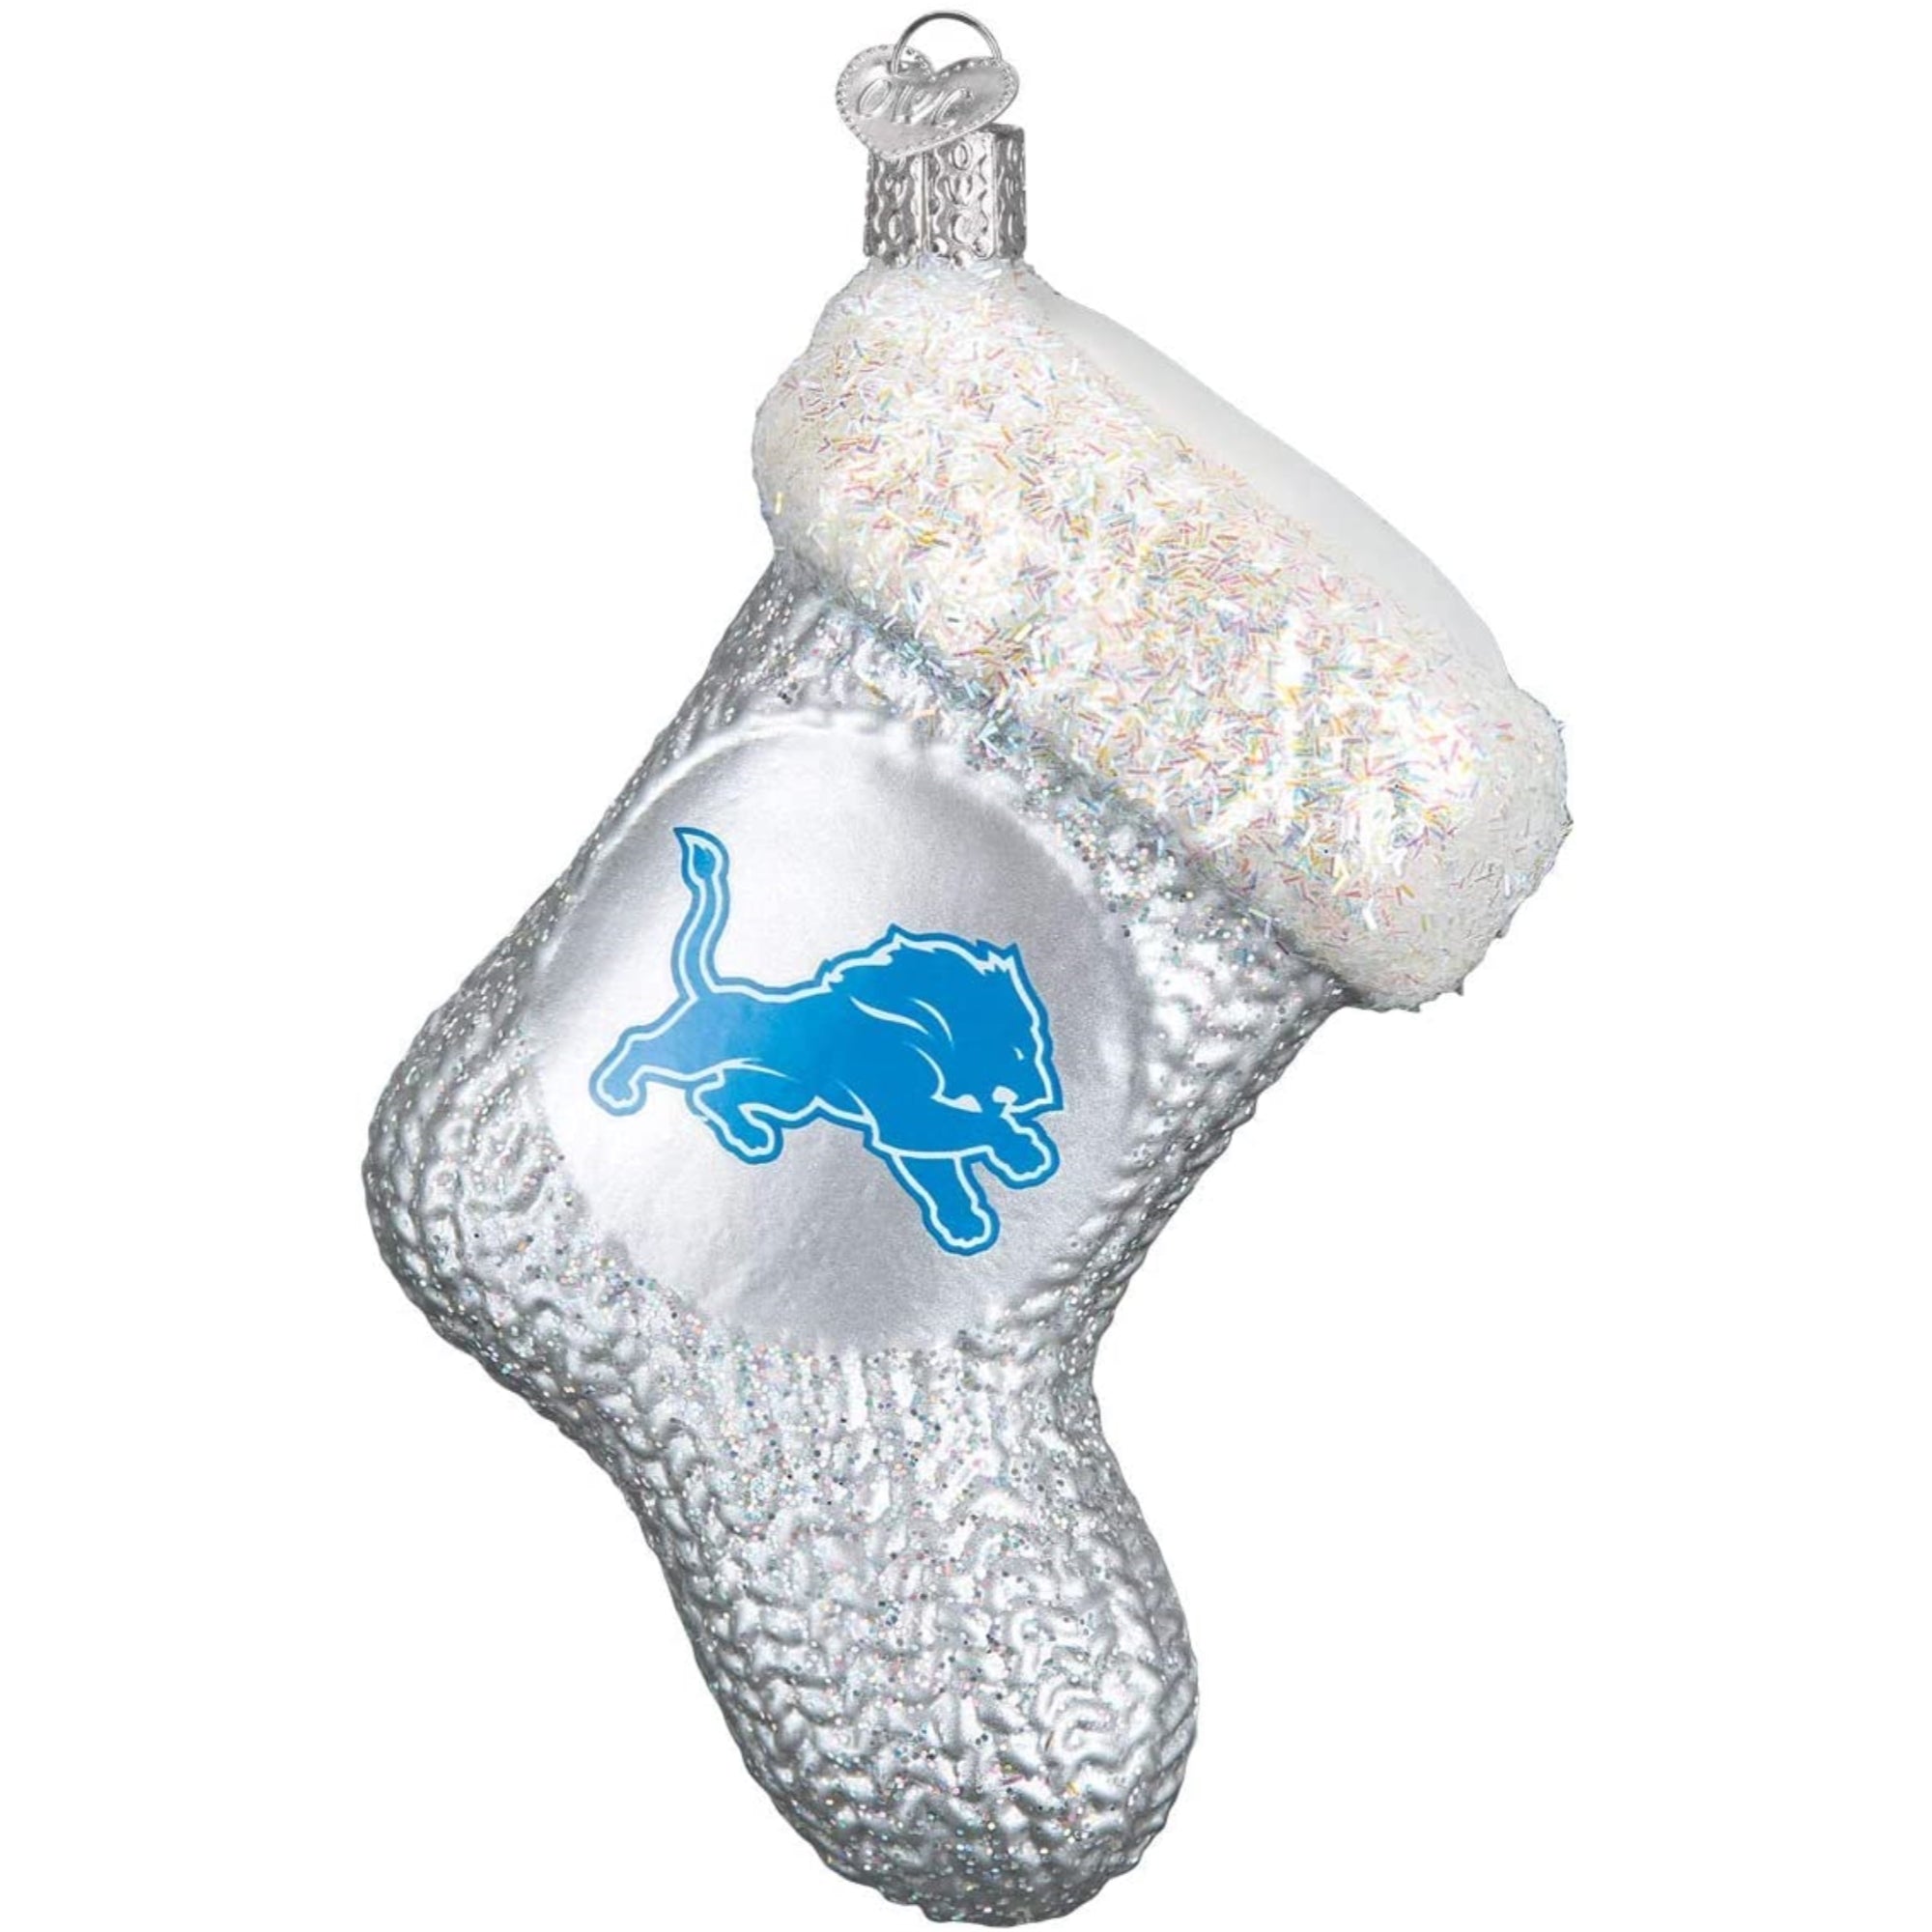 Old World Christmas Detroit Lions Stocking Ornament For Christmas Tree